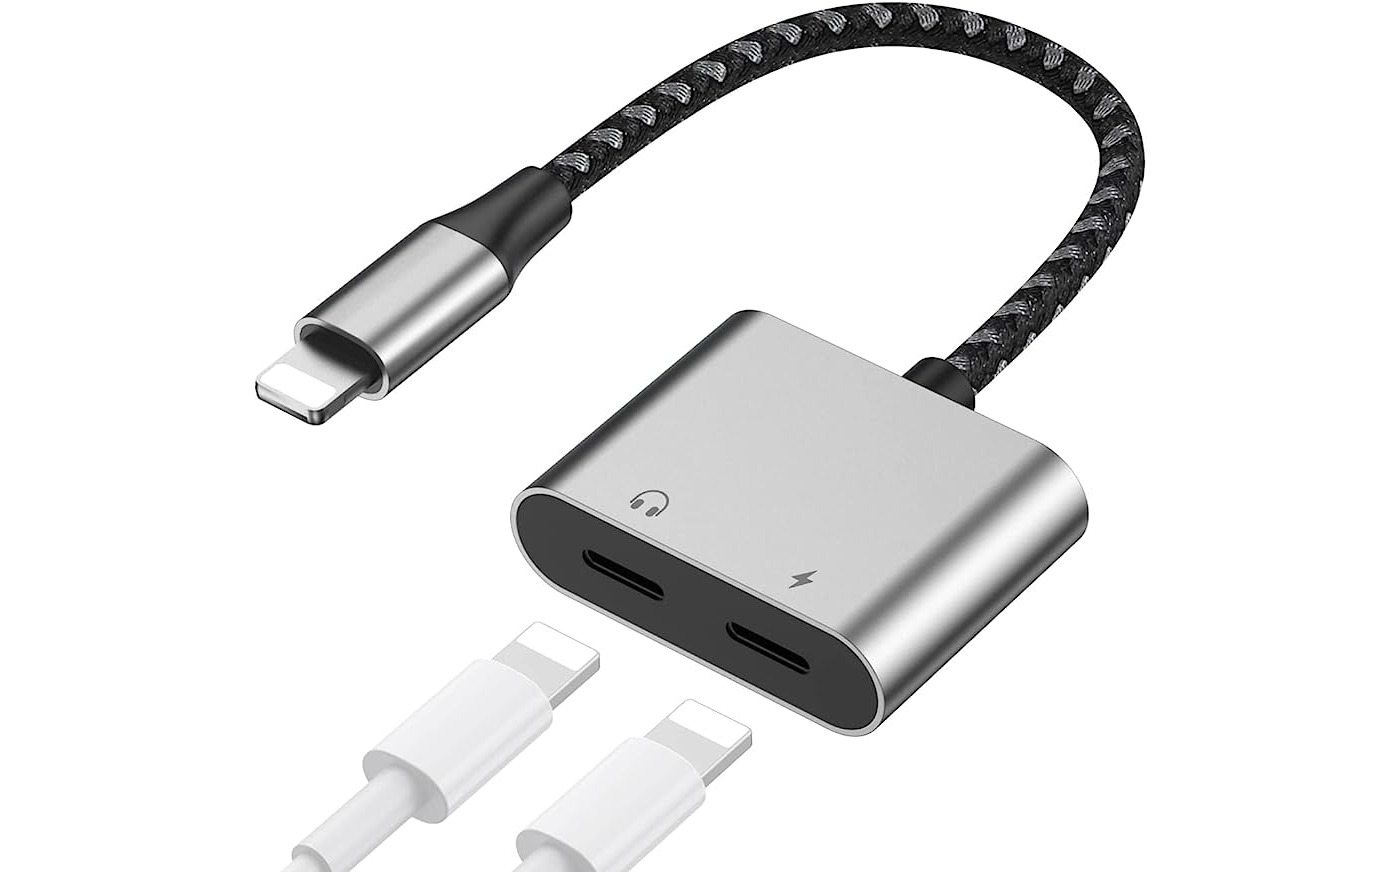 where-can-i-buy-an-iphone-dongle